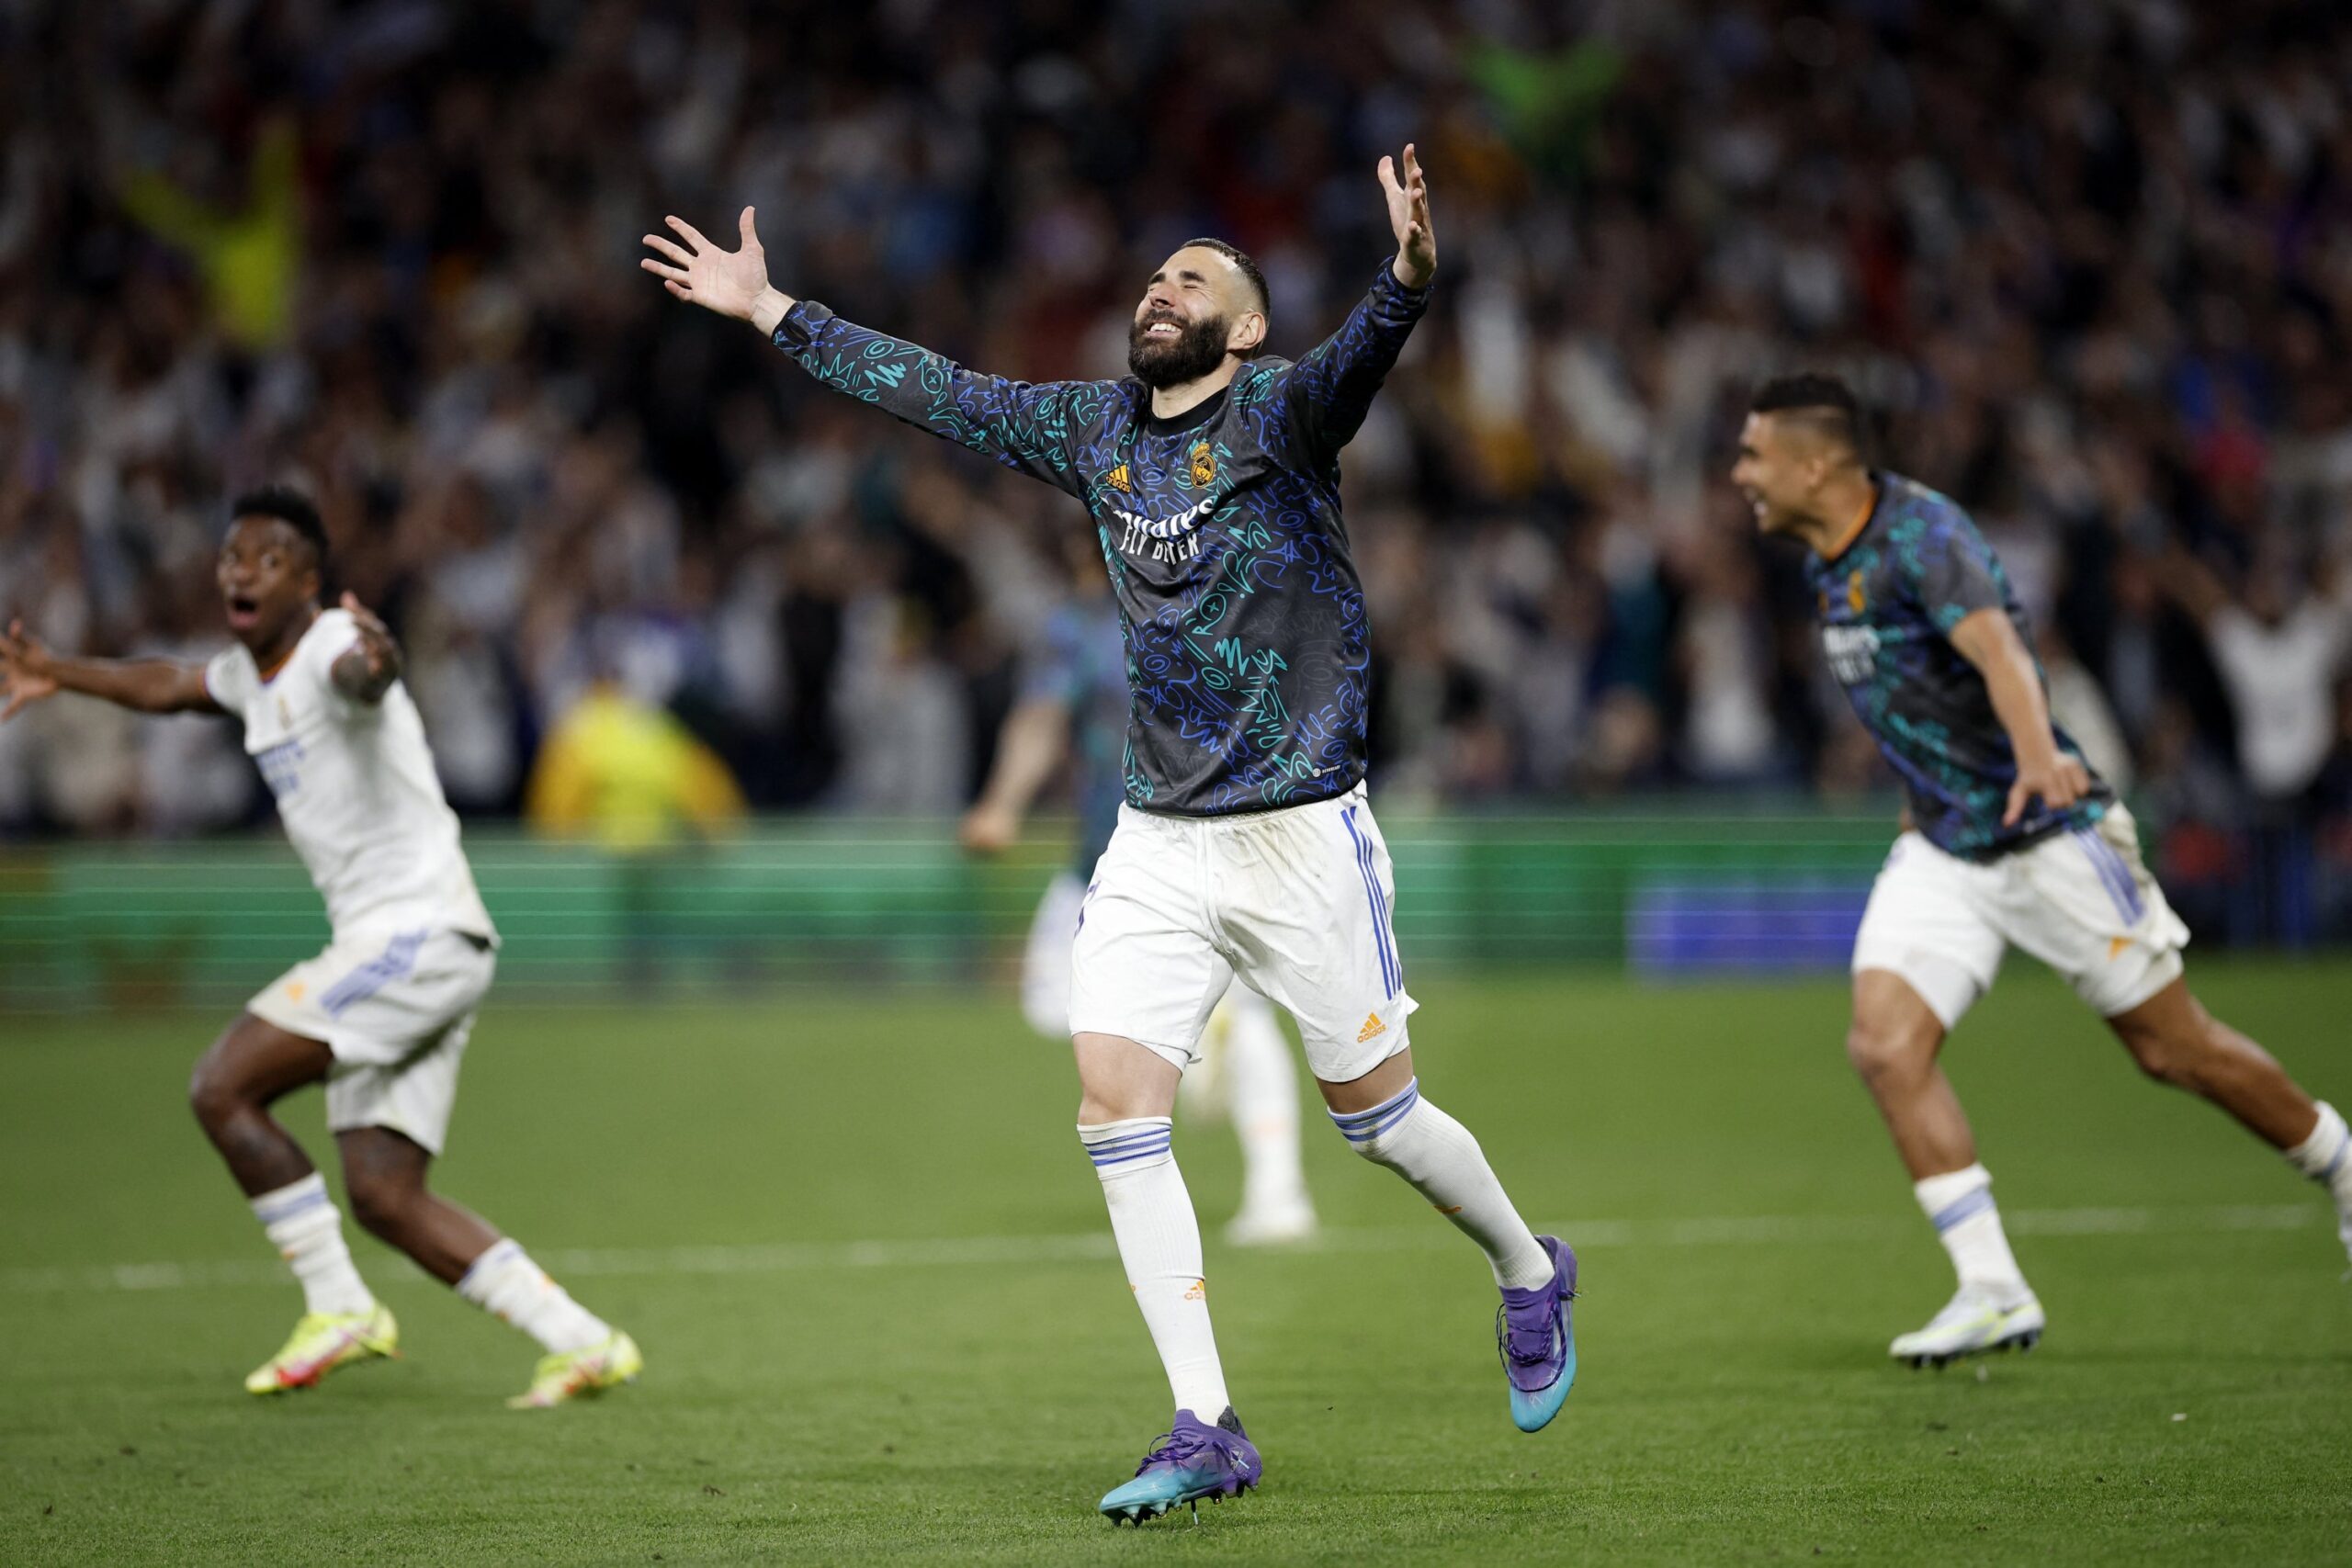 Real Madrid's Champions League Journey: A Night to Remember at the Santiago Bernabeu